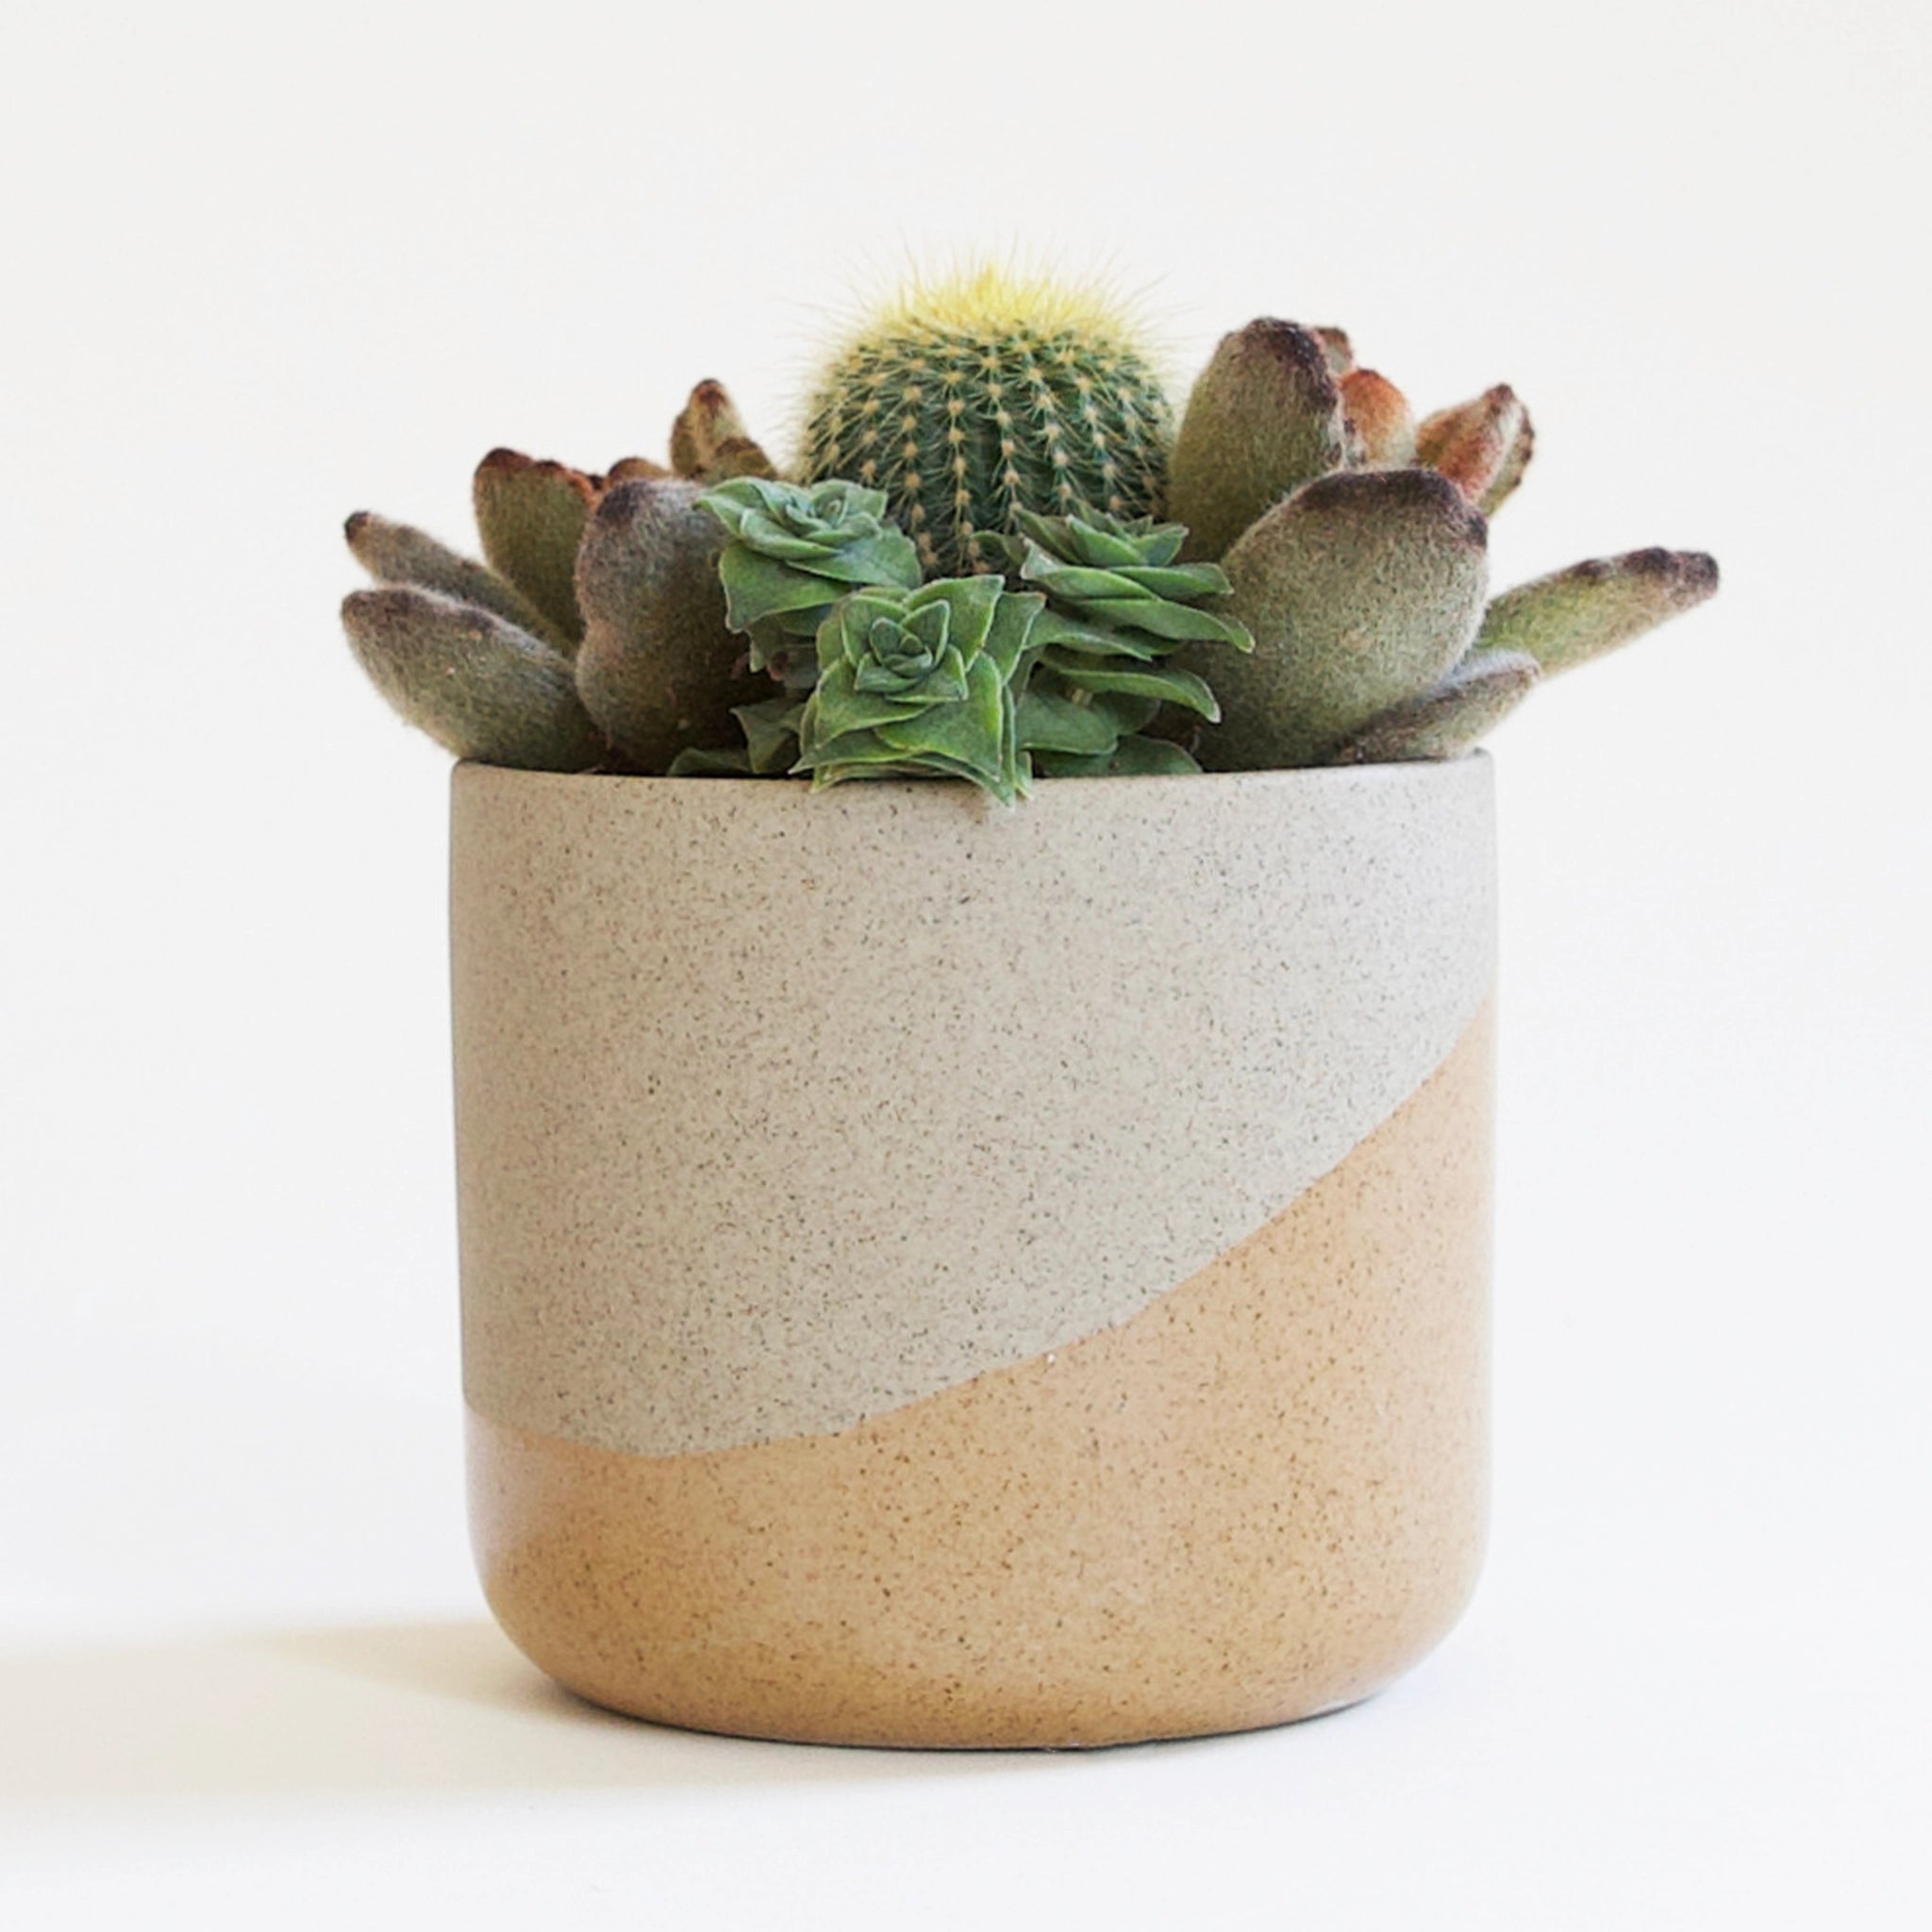 A tan and orange speckled pot is filled with succulents and cacti